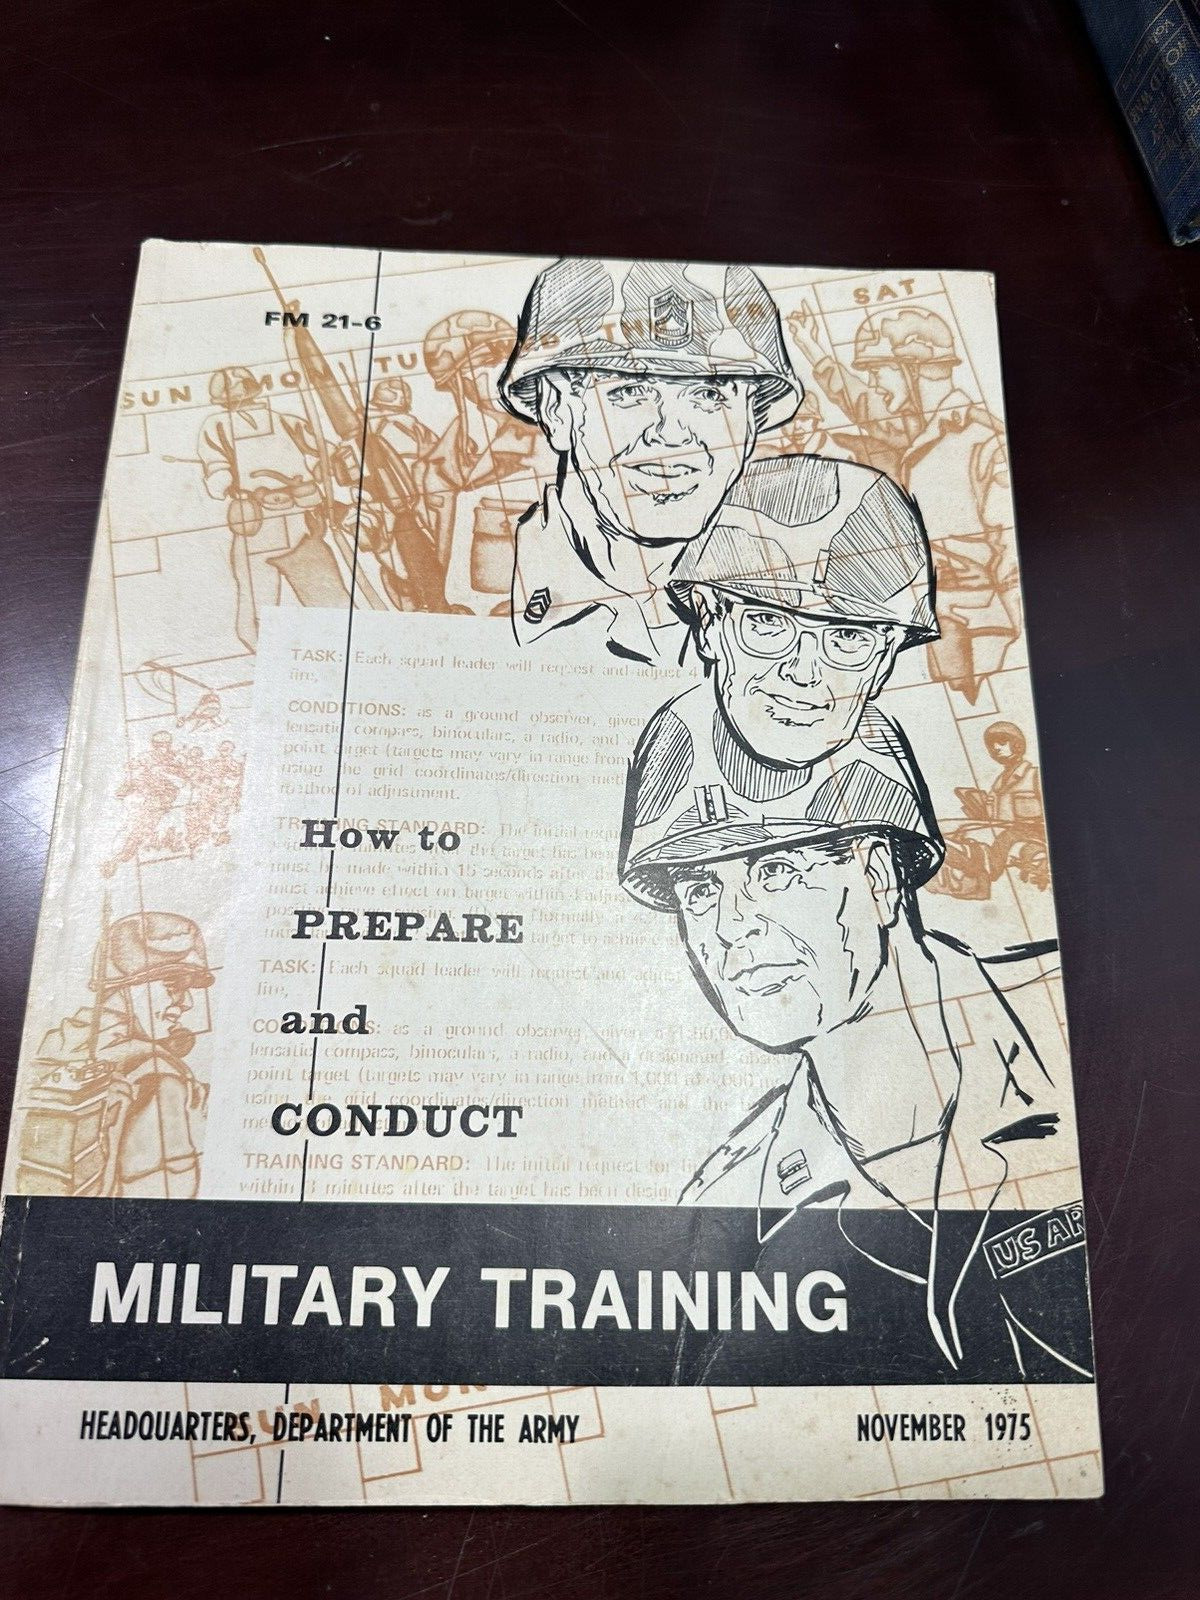 FM21-6 How to Prepare and Conduct Military Training